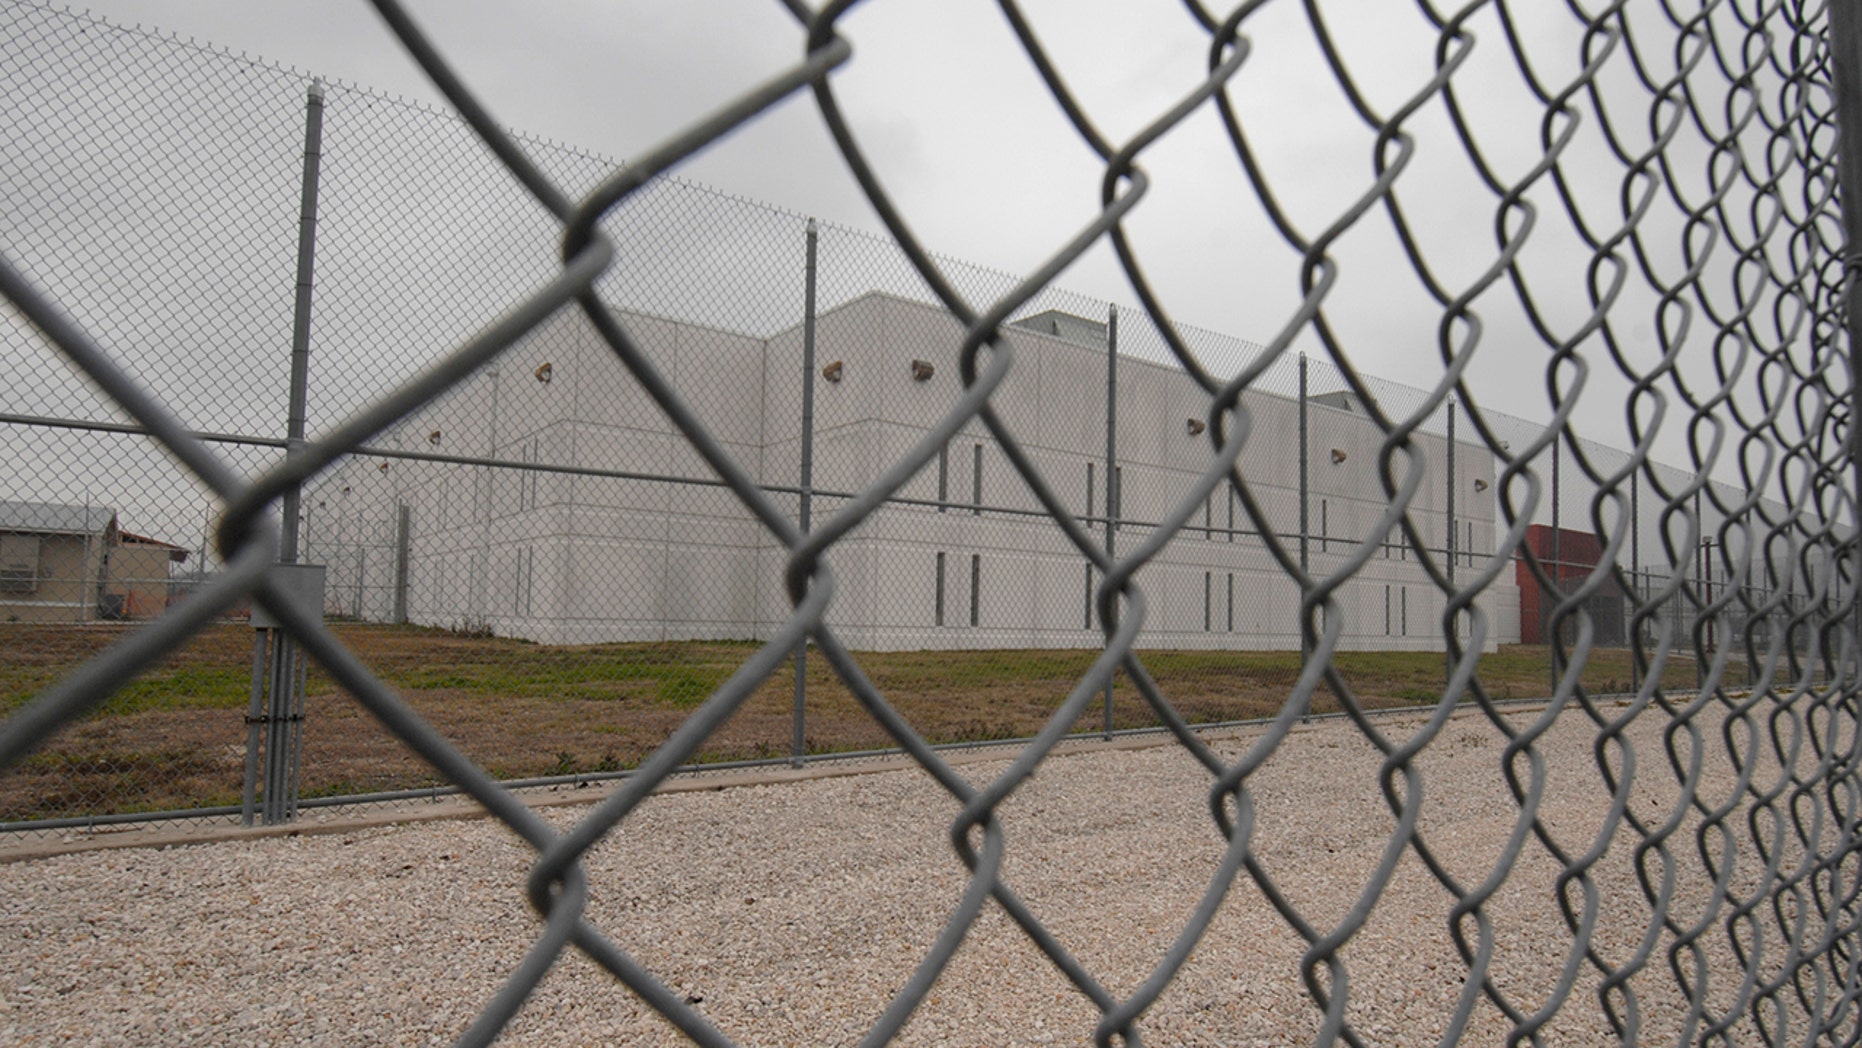 ICE officials force-feed 6 immigrants on hunger strike at Texas detention center